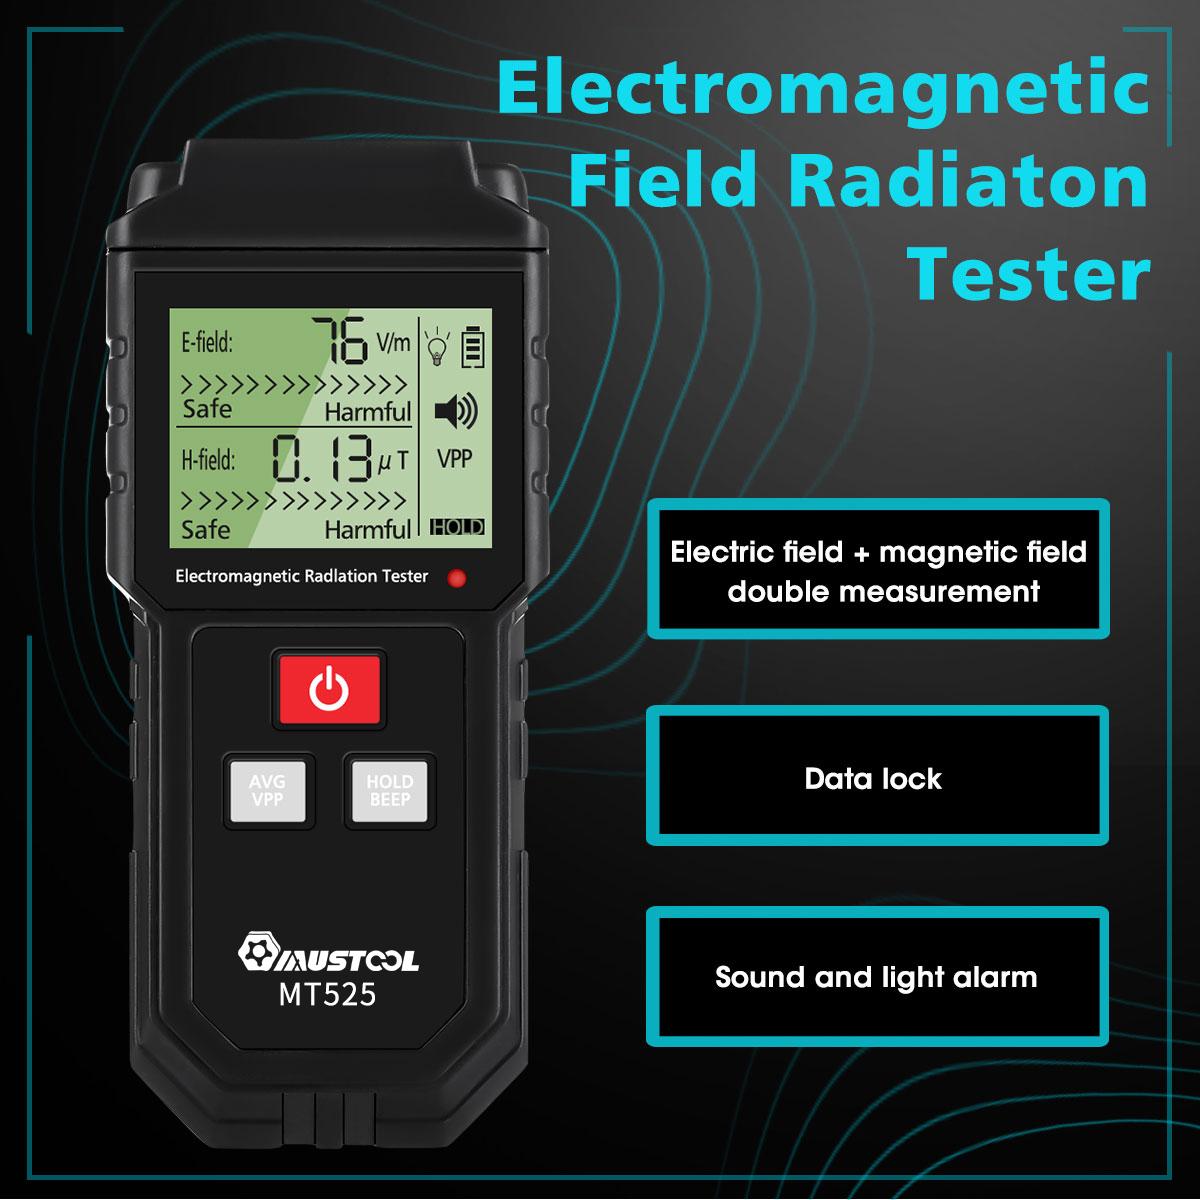 MUSTOOL MT525 Electromagnetic Radiation Tester Electric Field & Magnetic Field Dosimeter Tester Sound and Light Alarm 56